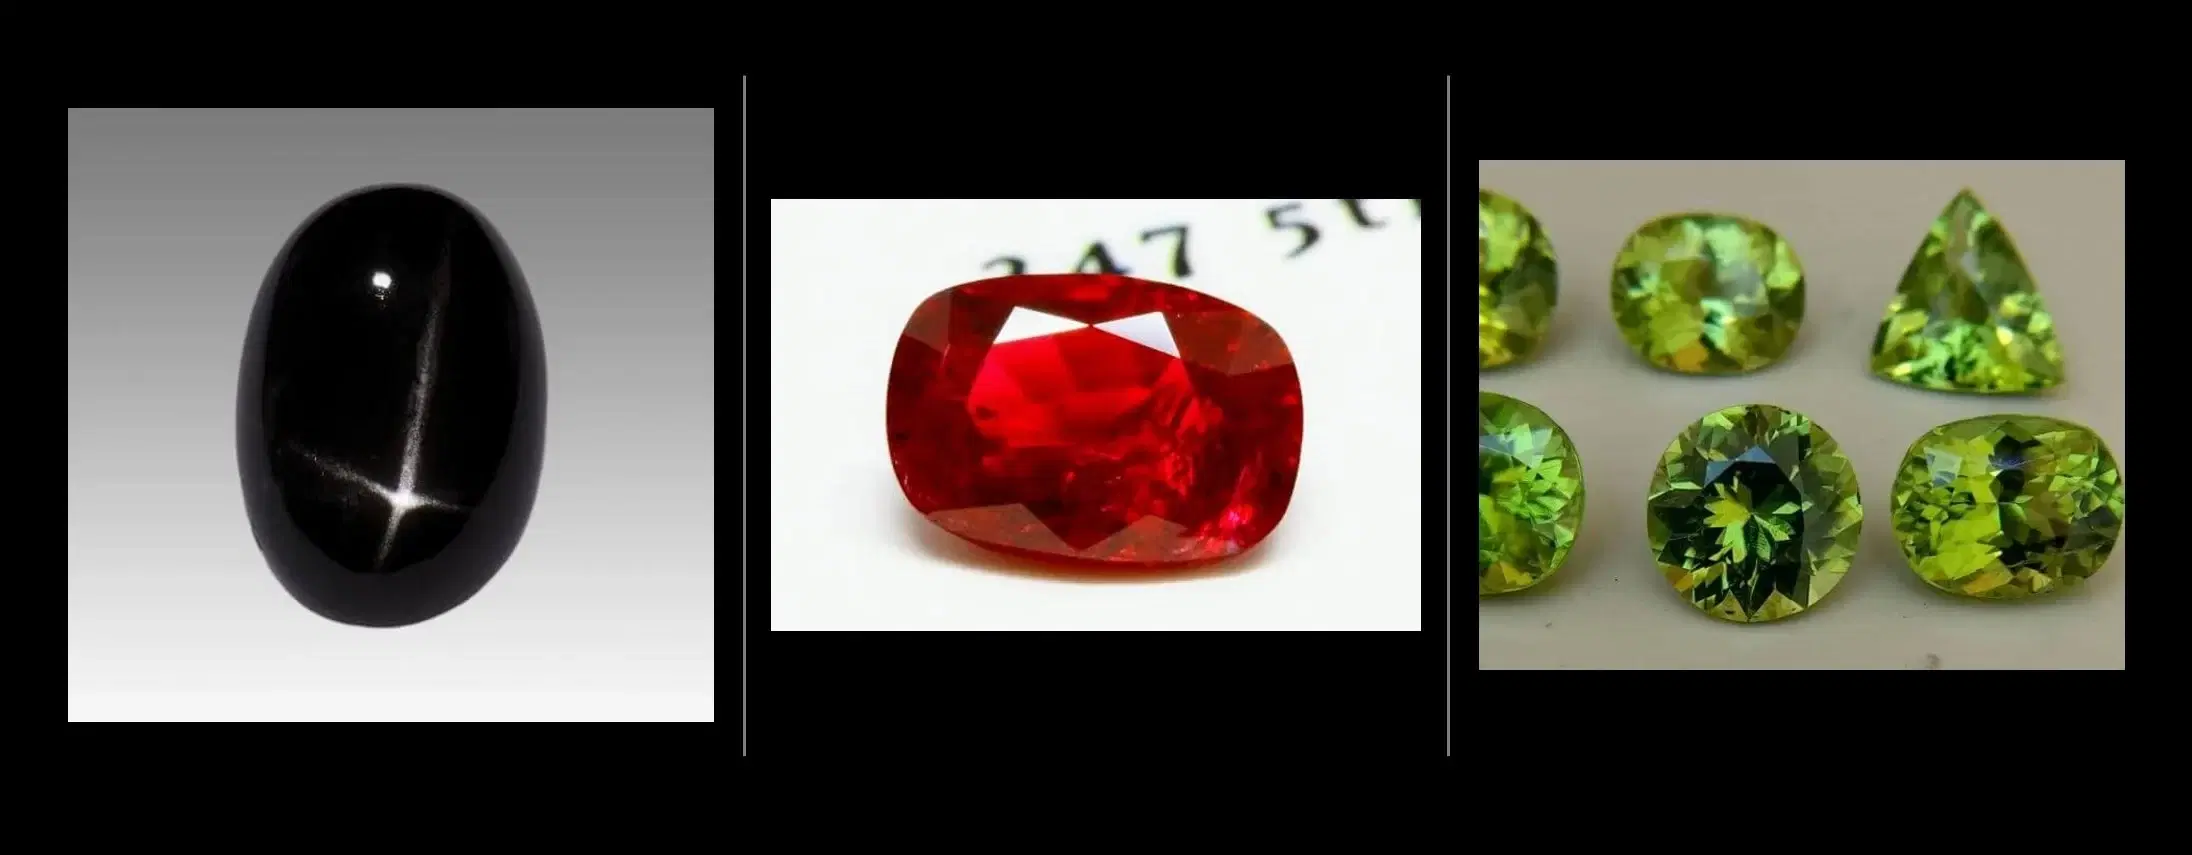 August Birthstone: Three Gems Fit the Occasion